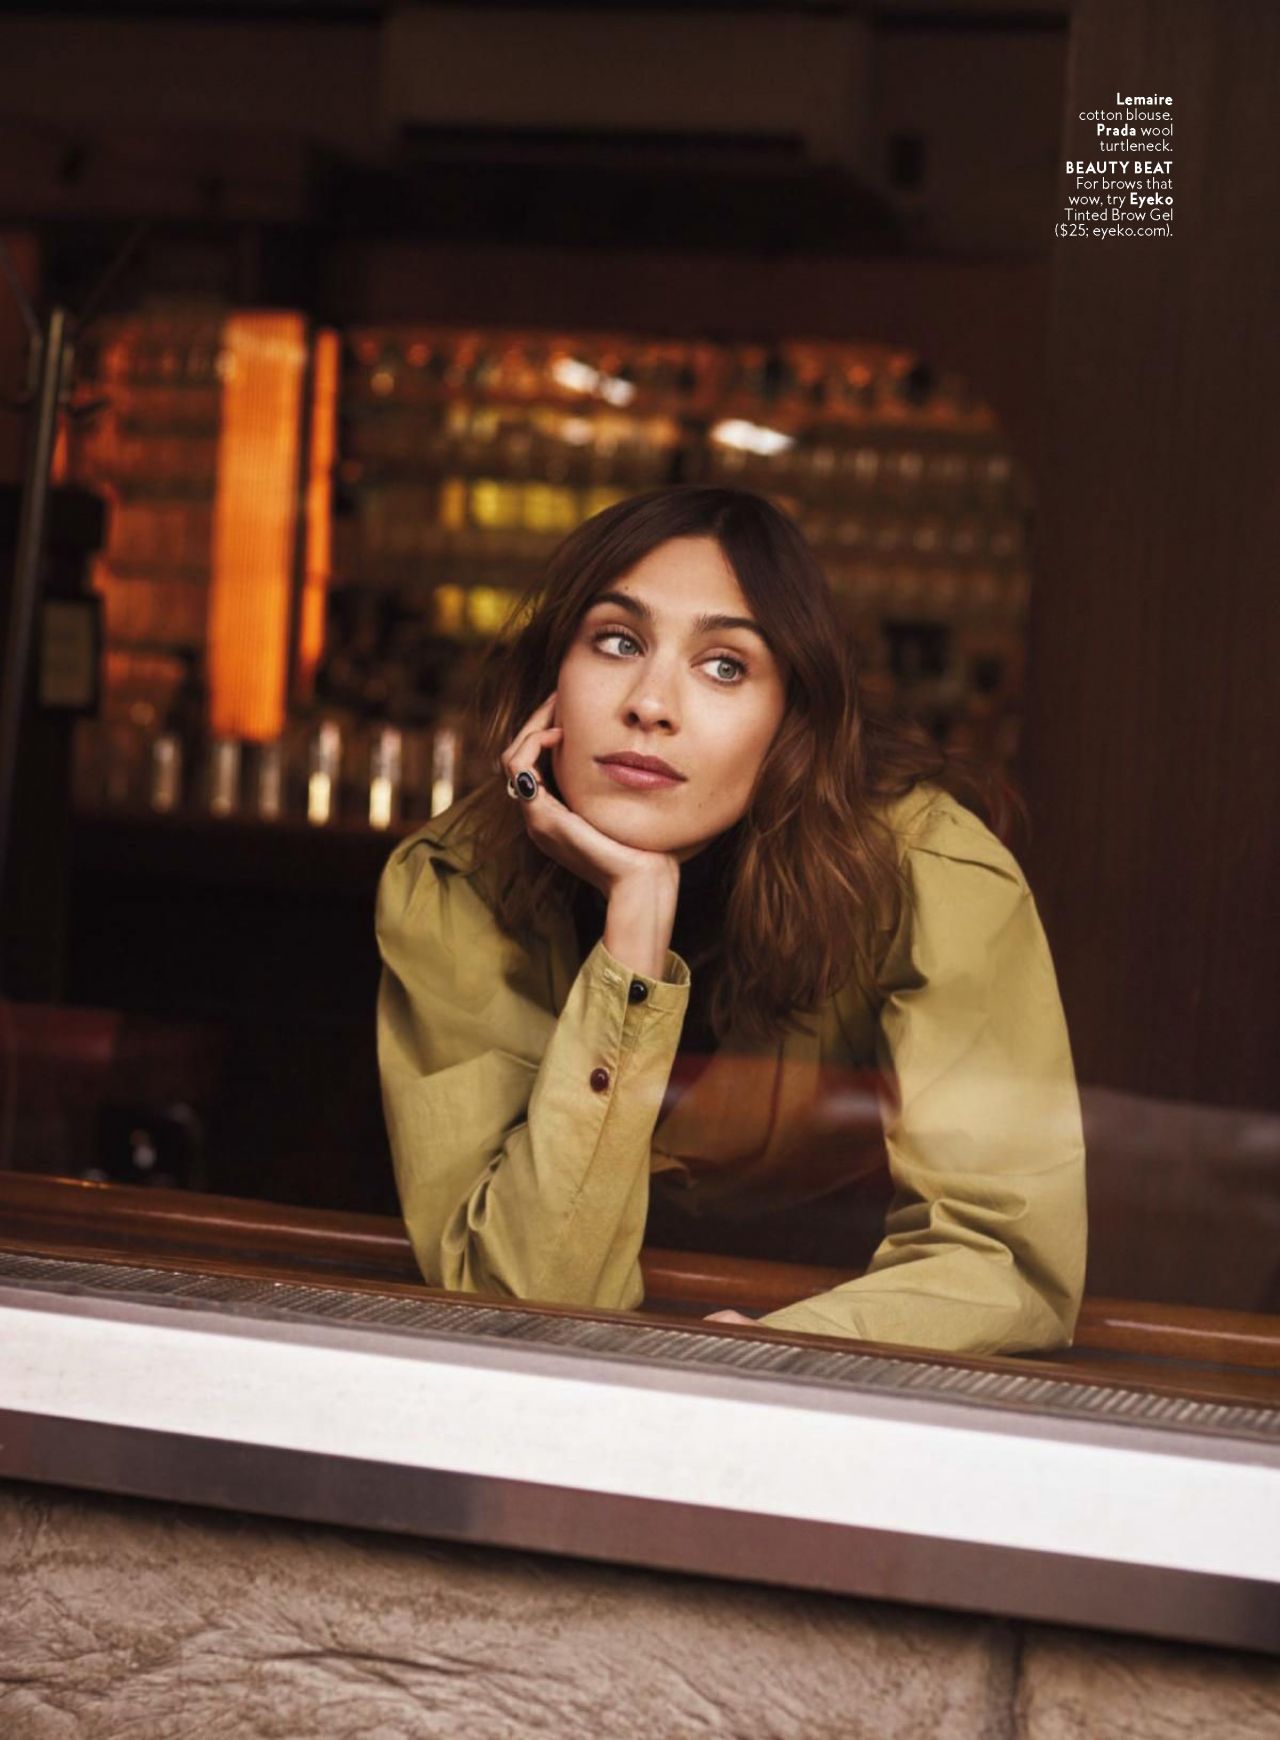 Alexa Chung - InStyle USA April 2017 Issue1280 x 1740